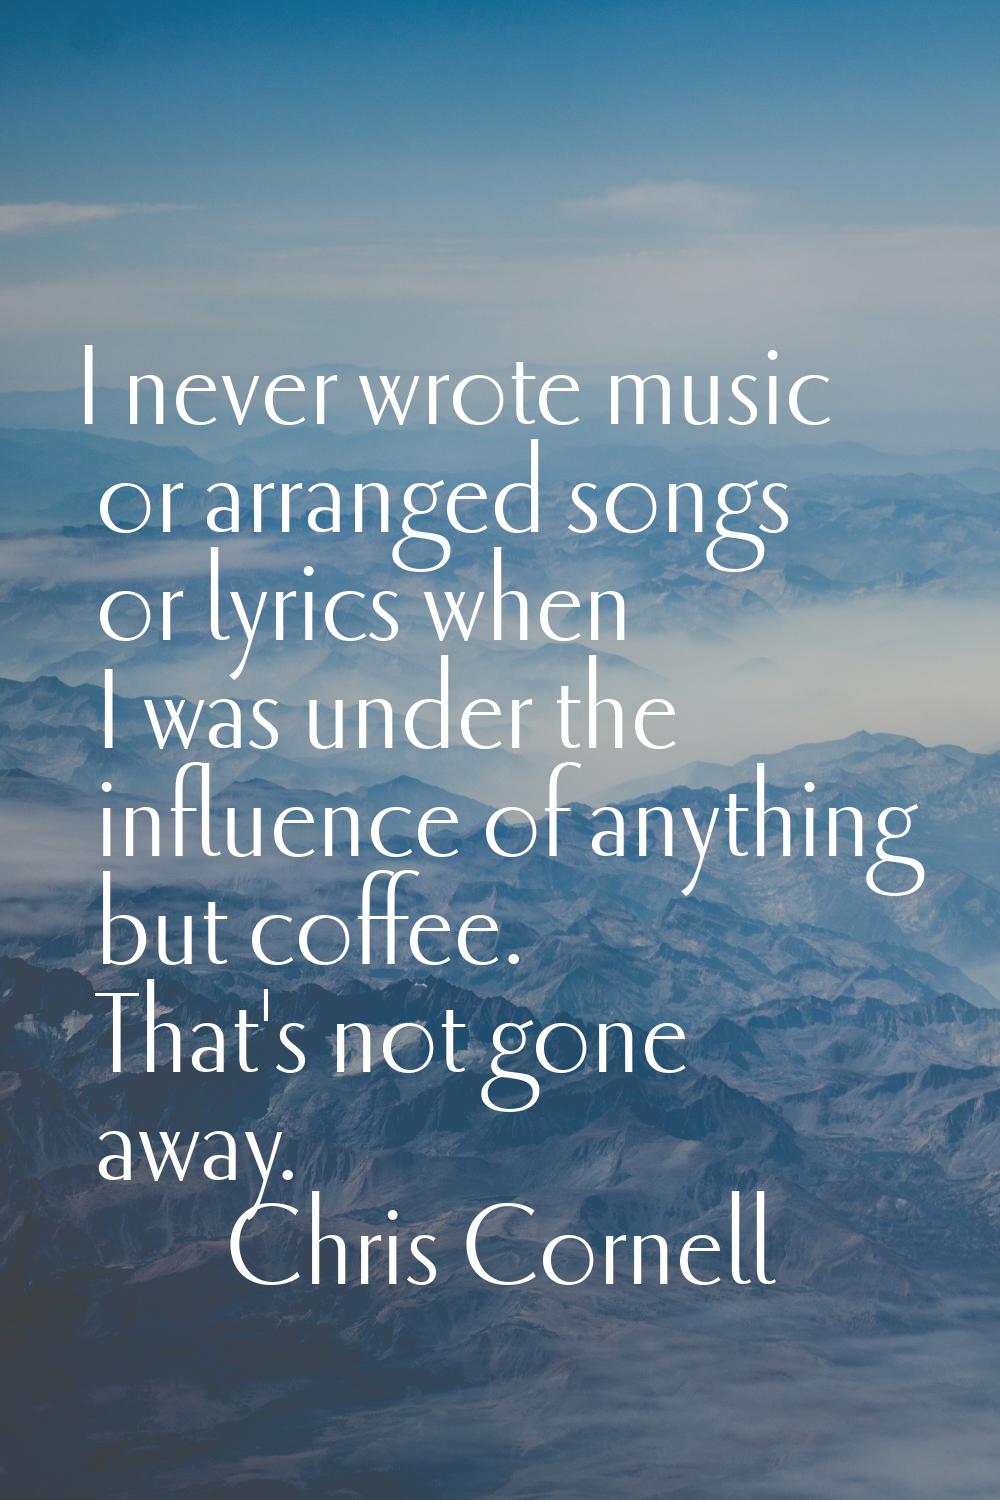 I never wrote music or arranged songs or lyrics when I was under the influence of anything but coff